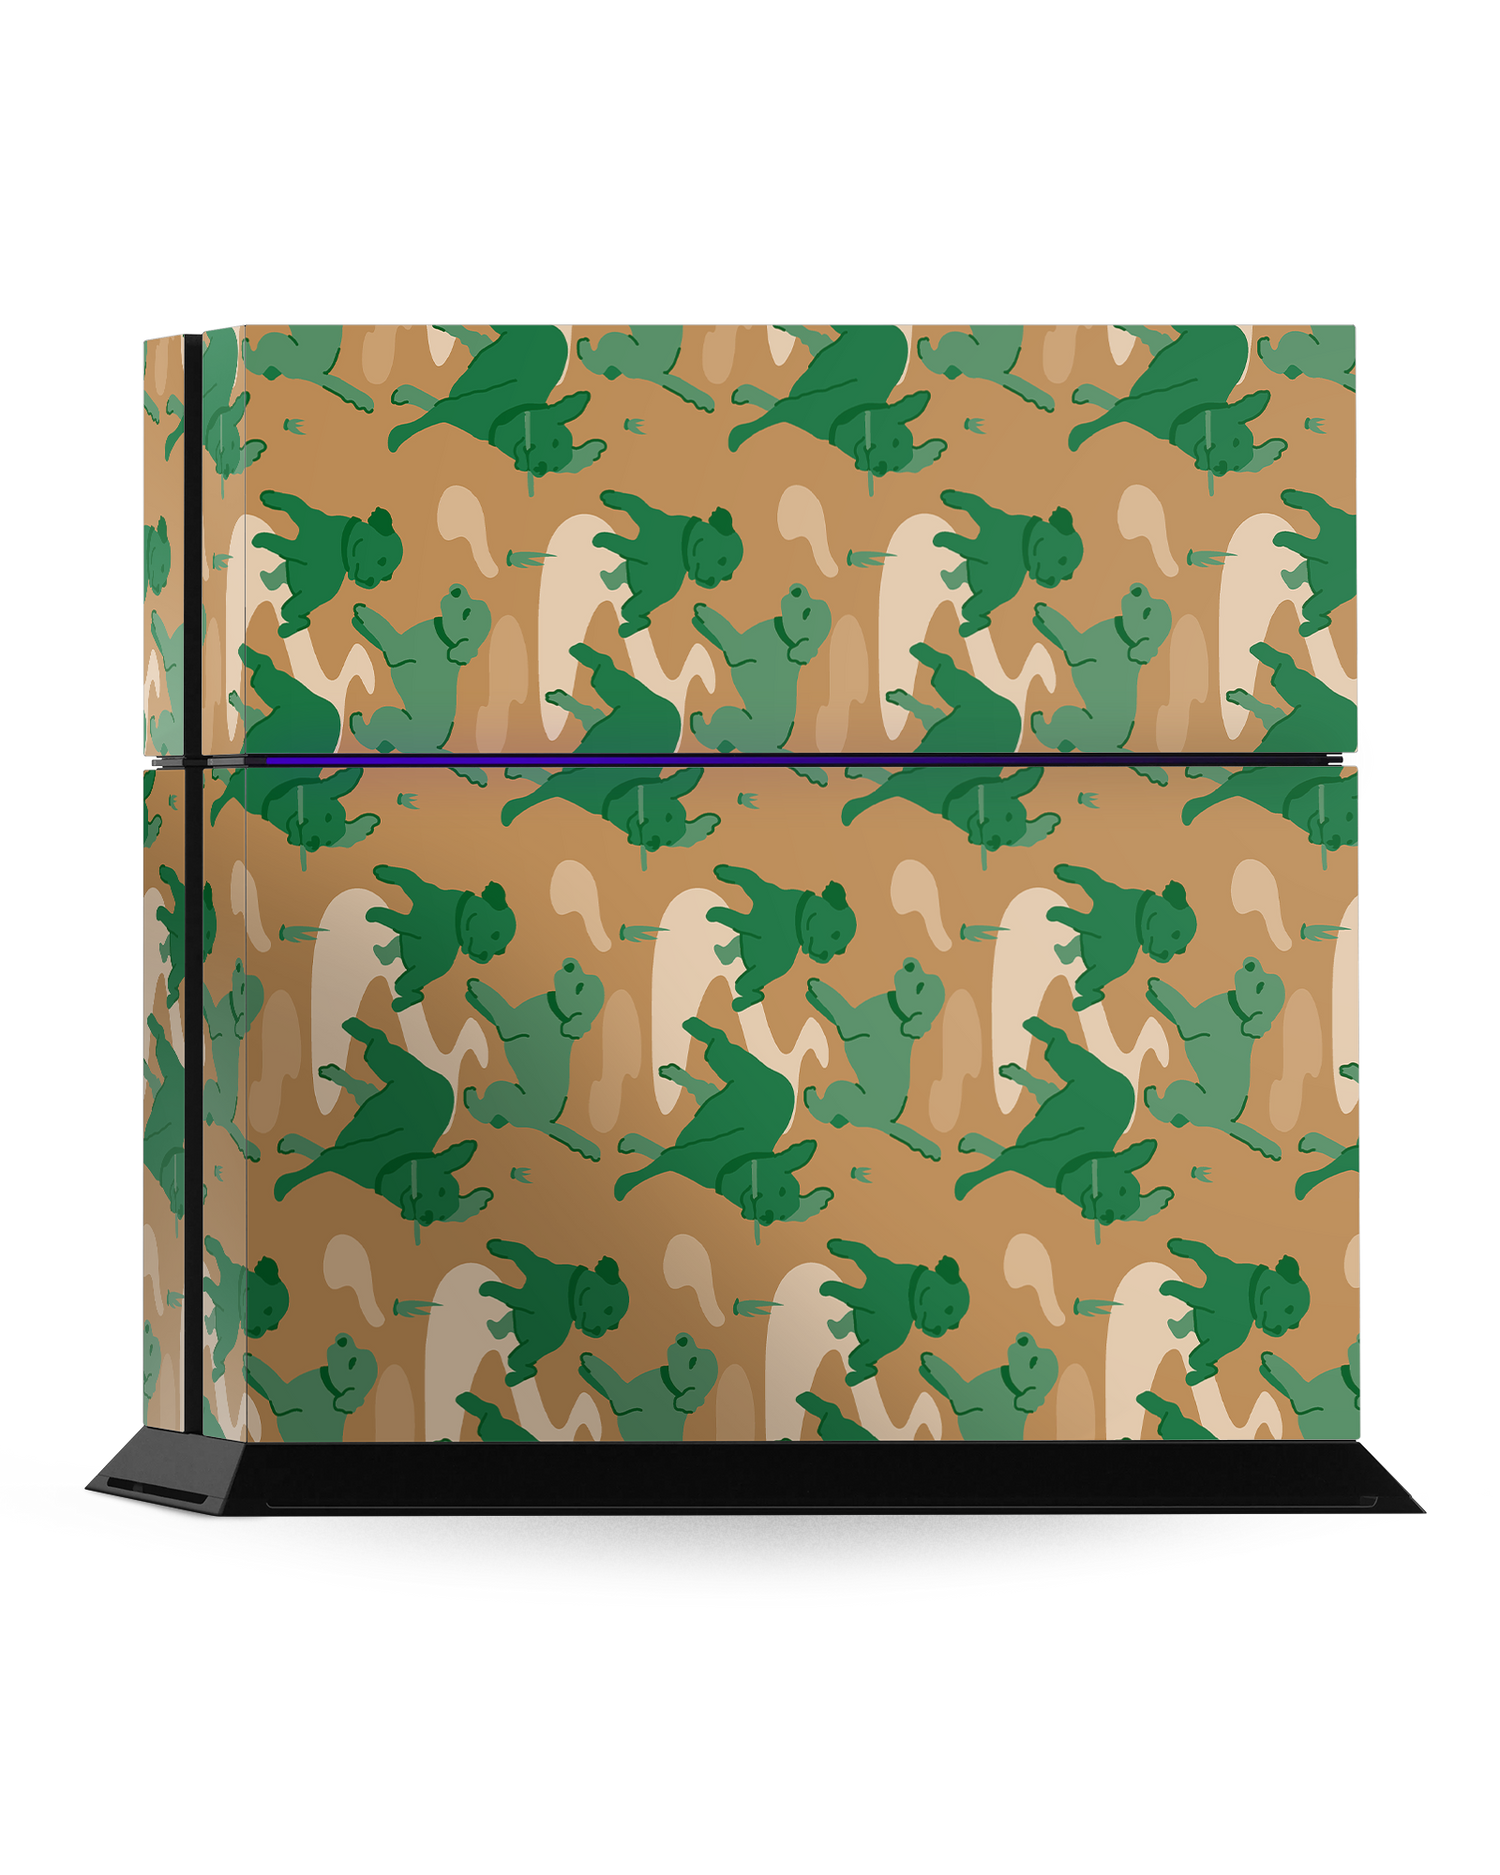 Dog Camo Console Skin for Sony PlayStation 4: Standing